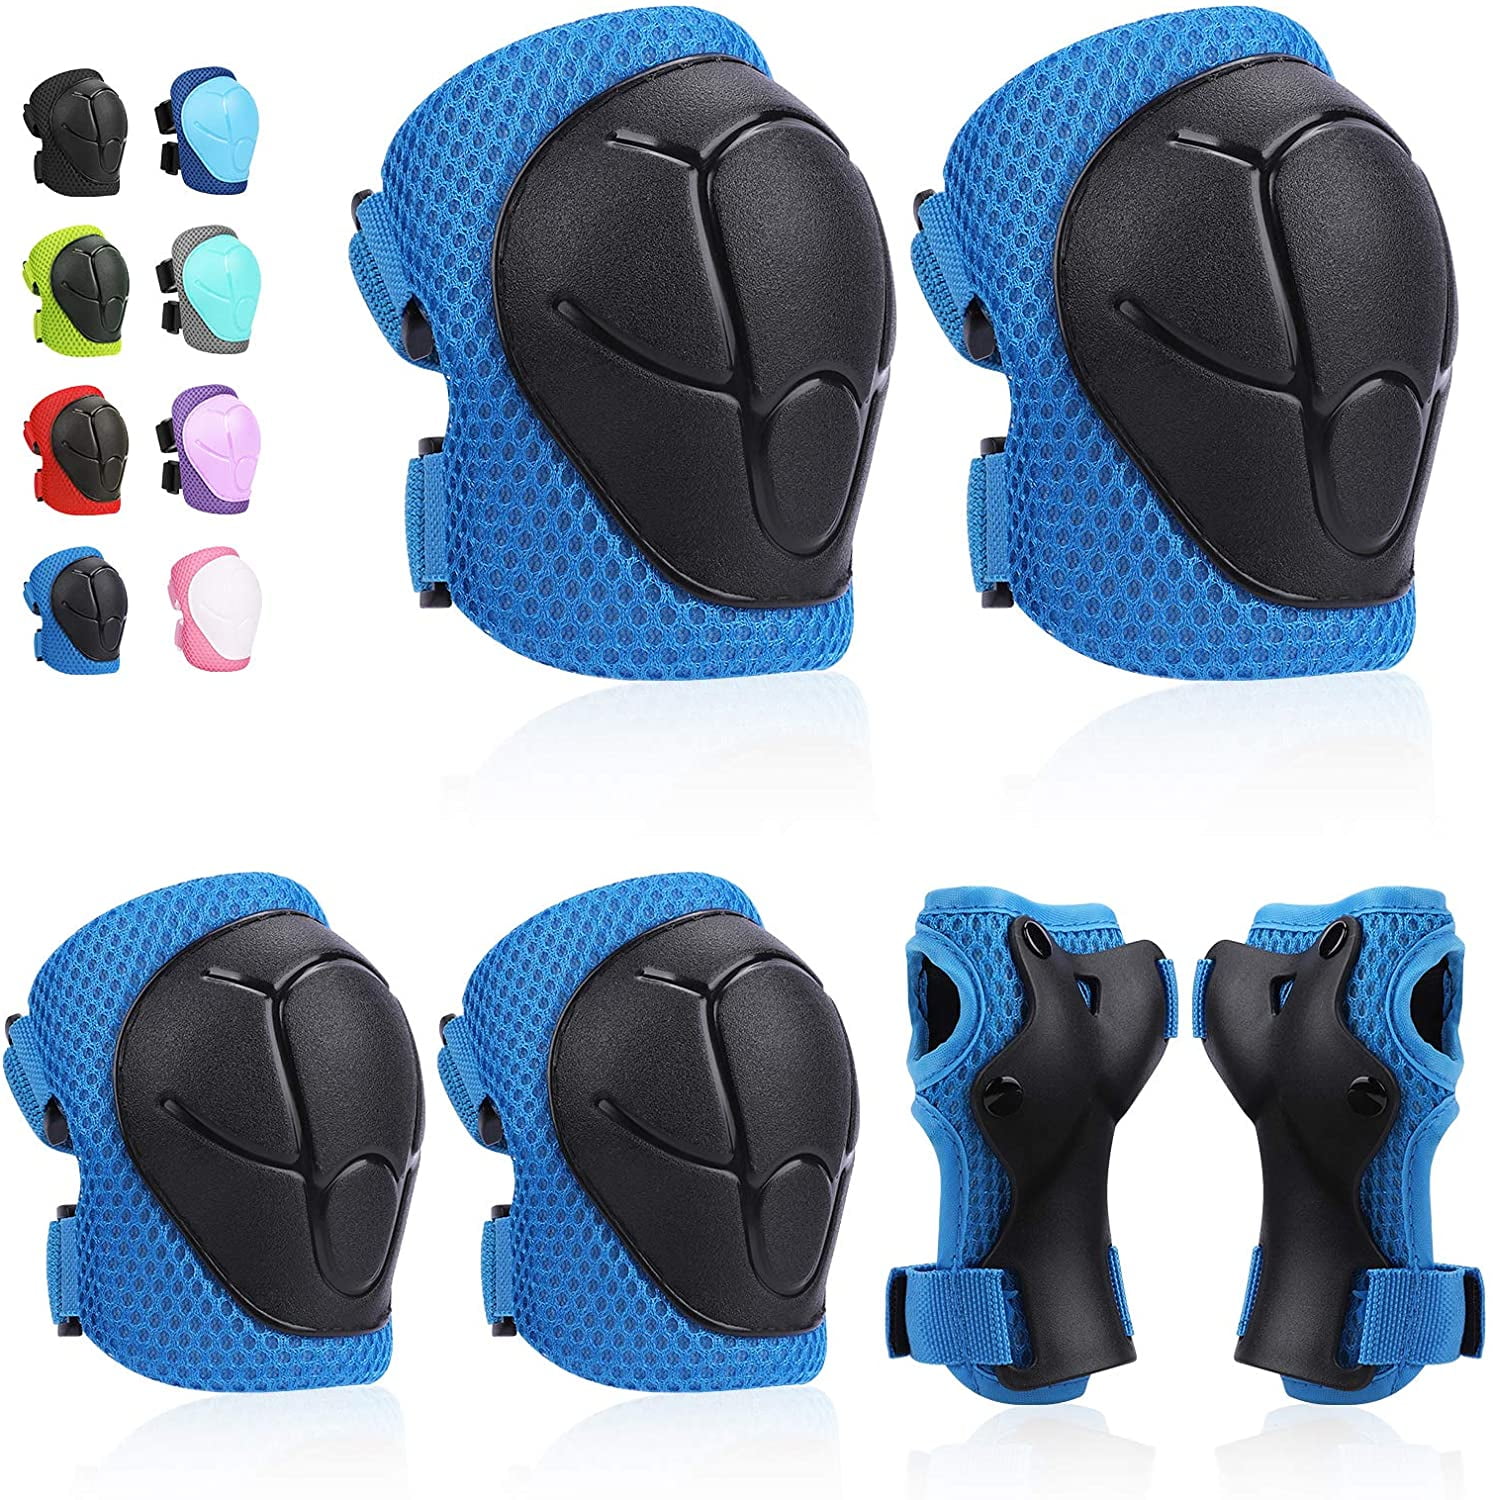 Kids Knee Pads Elbow Pads Guards for Skating Cycling Bike Rollerblading Scooter,3 in 1 Kids Protective Gear for 3-8 Years Old Boys and Girls Blue 